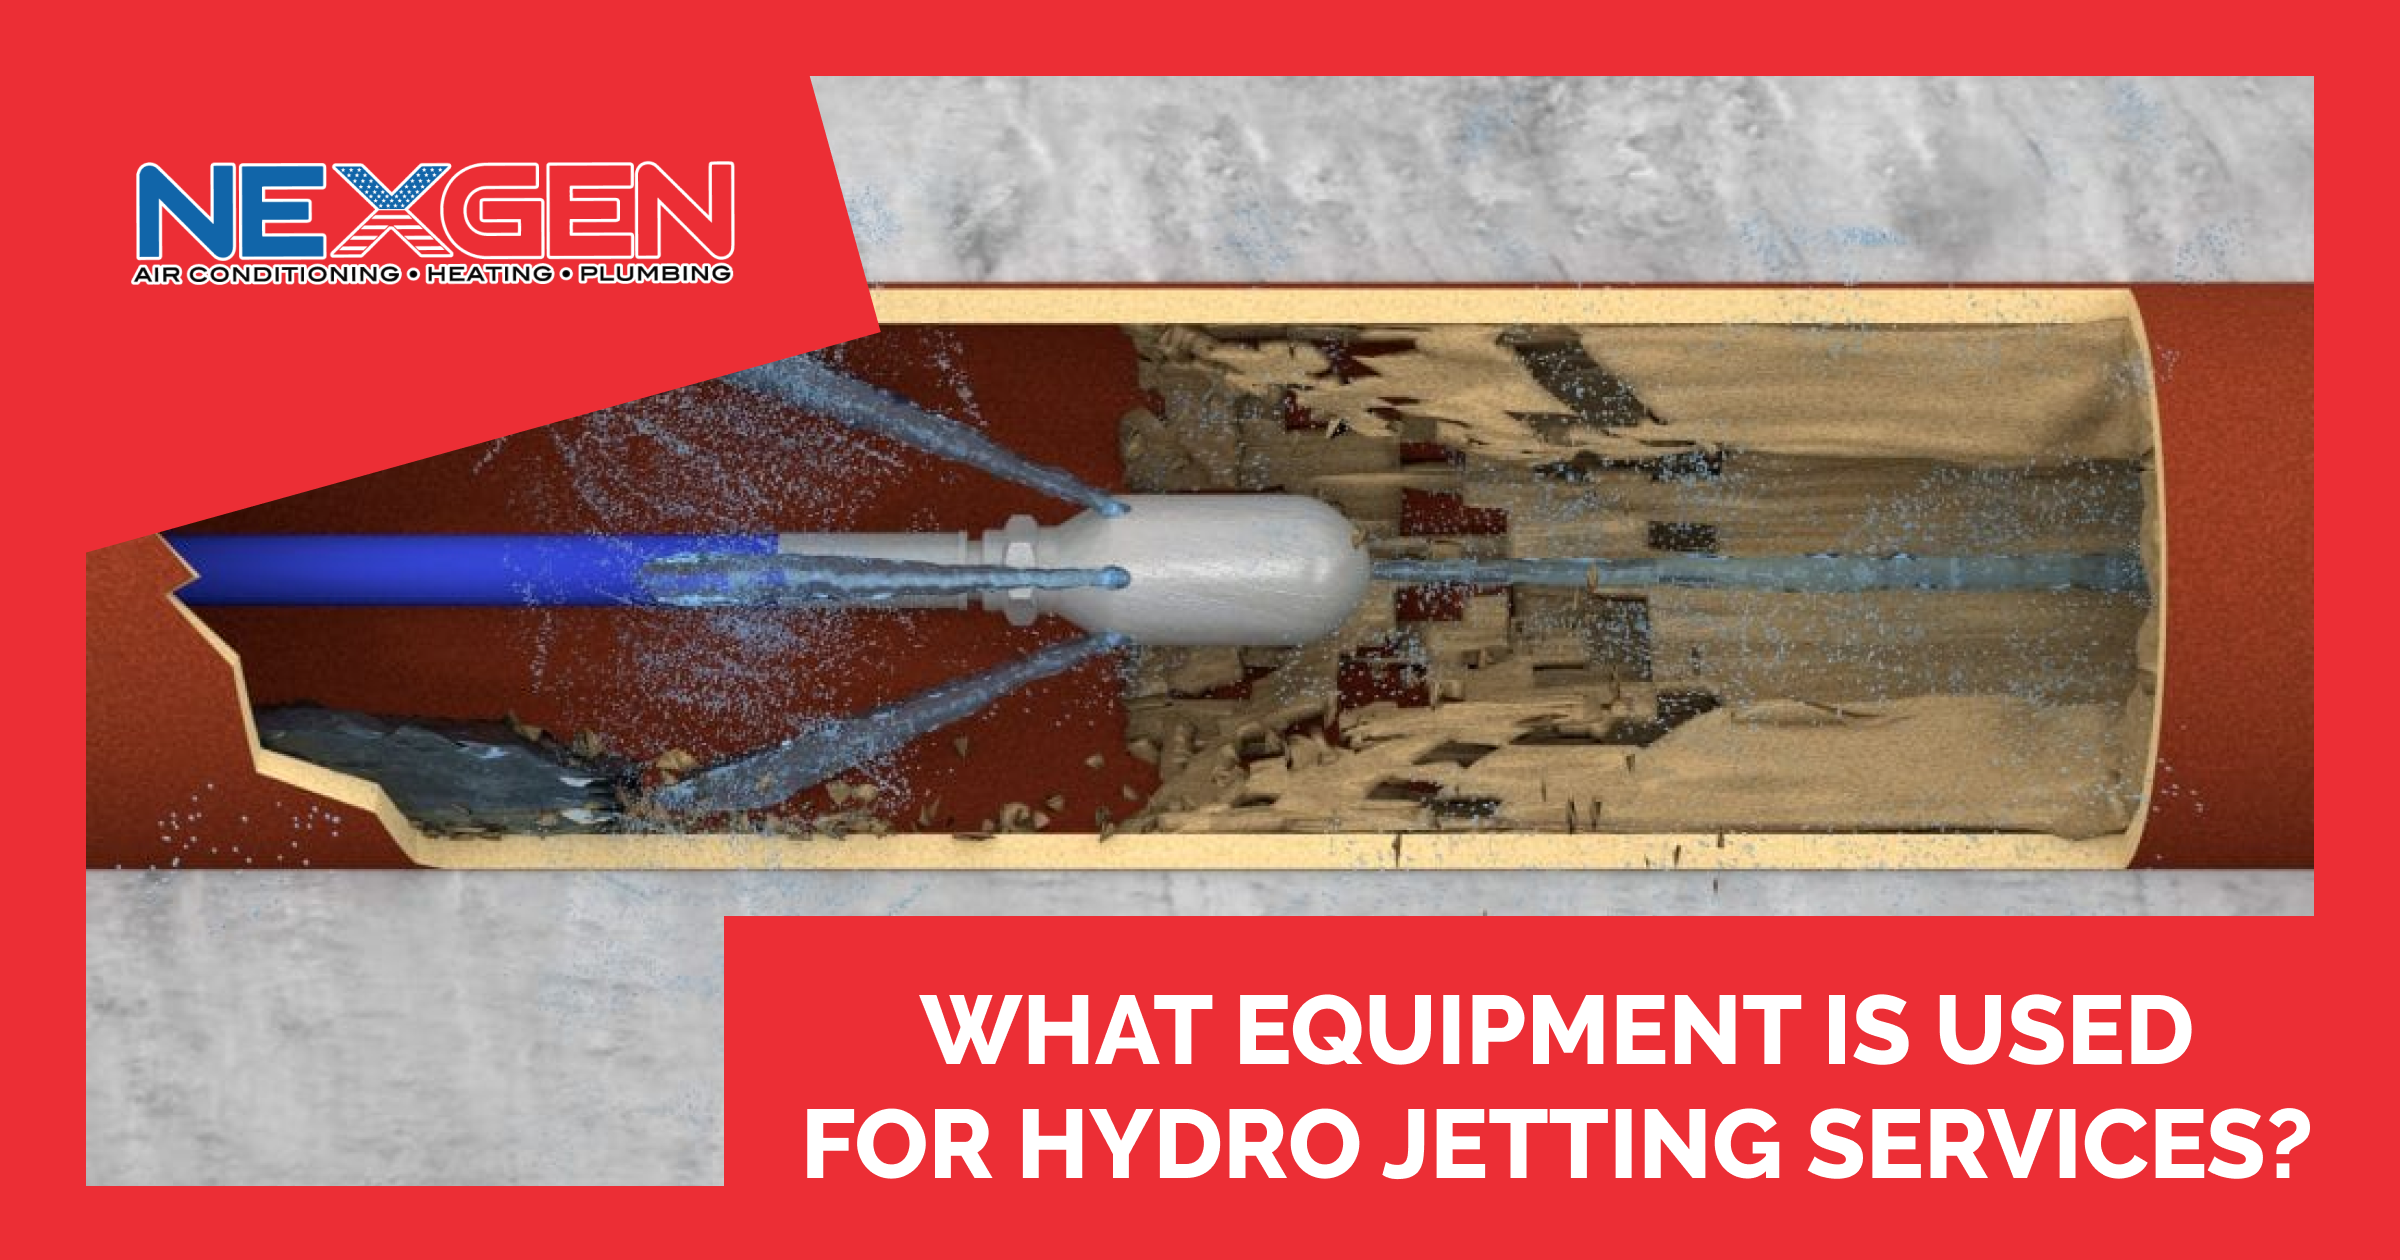 NexGen What Equipment is used for Hydro Jetting Services